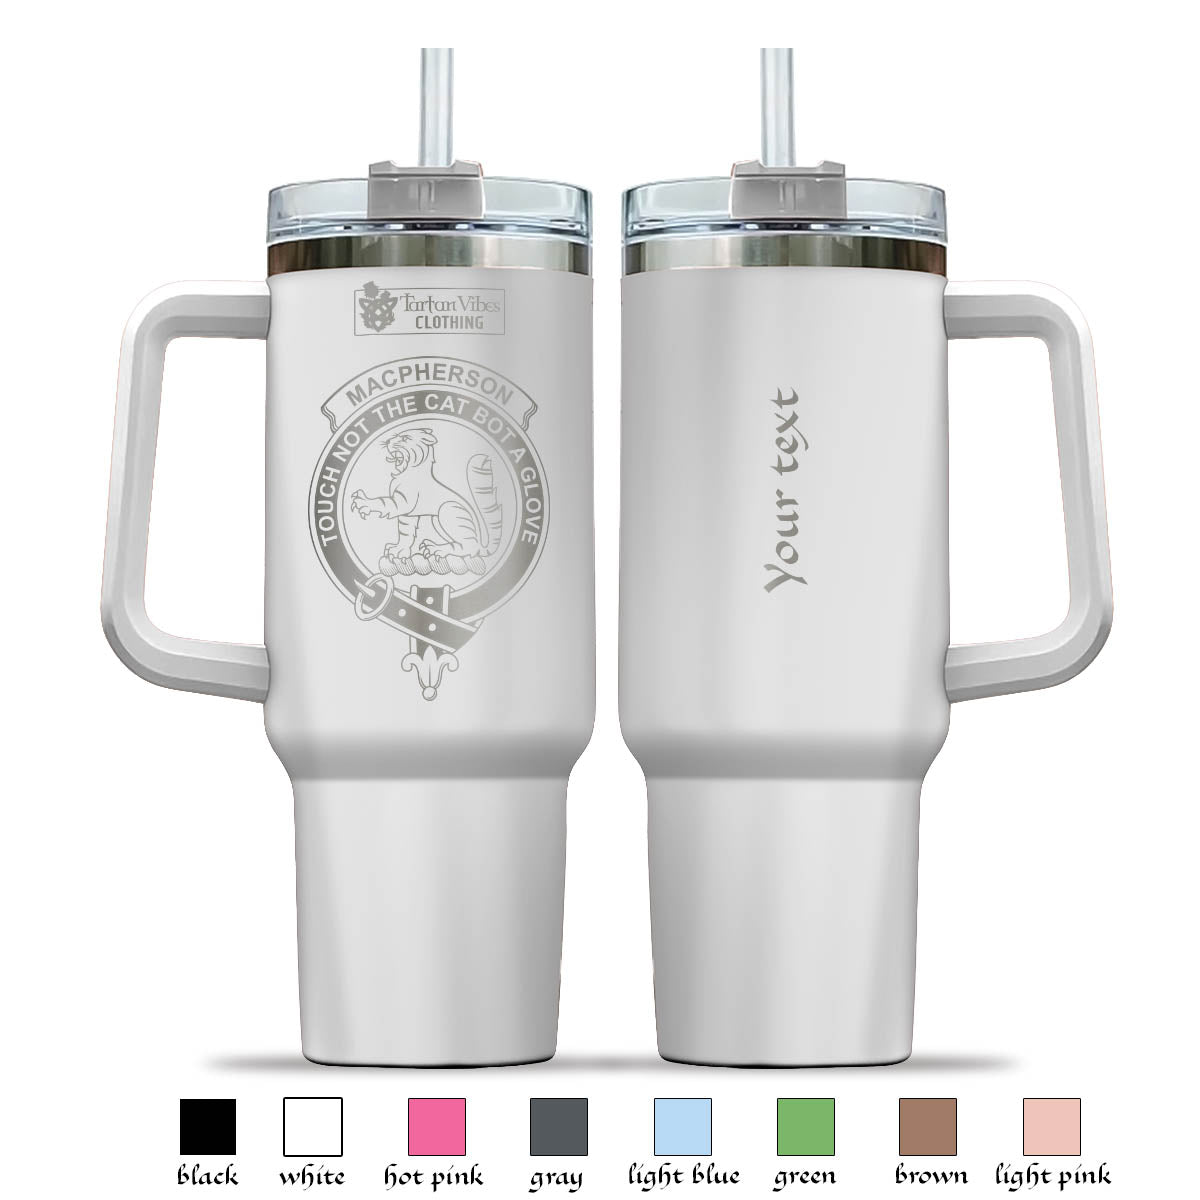 Tartan Vibes Clothing MacPherson Engraved Family Crest Tumbler with Handle